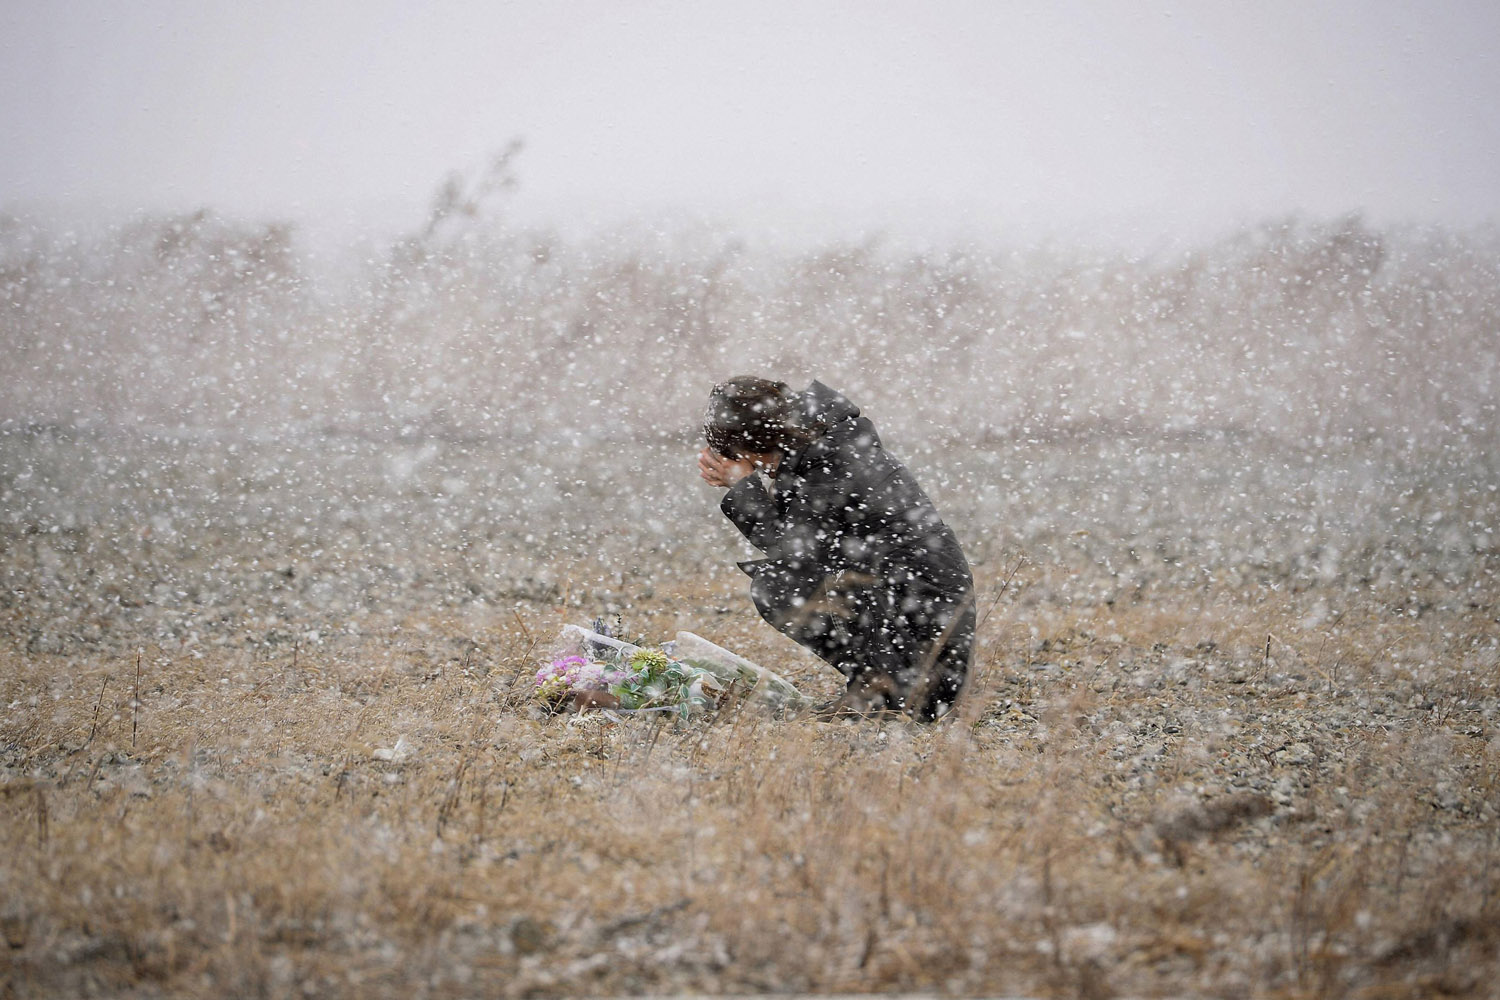 A woman prays for the deceased of March 11, 2011 earthquake and tsunami at a place where she was employed at a photo studio at the time, in Rikuzentakata, Iwate prefecture